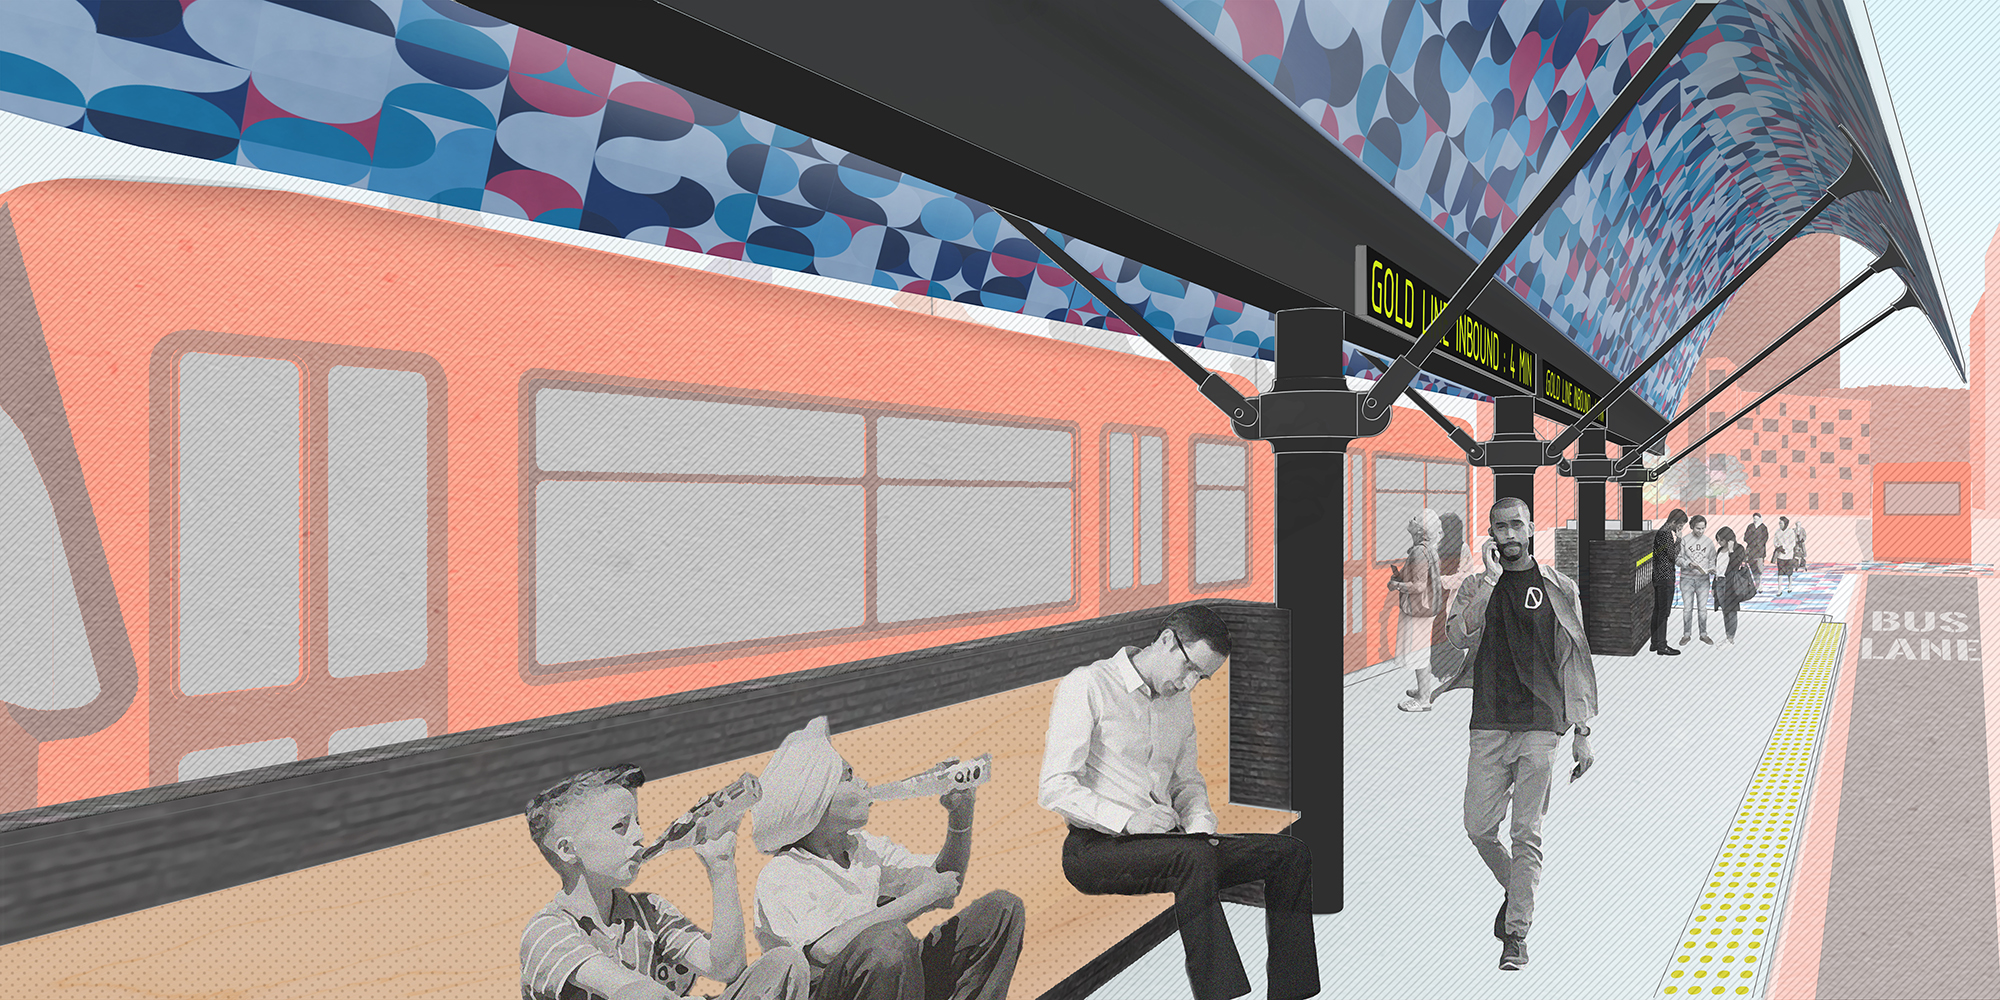 Utile wins 1st place in the BostonBRT Station Design Competition!